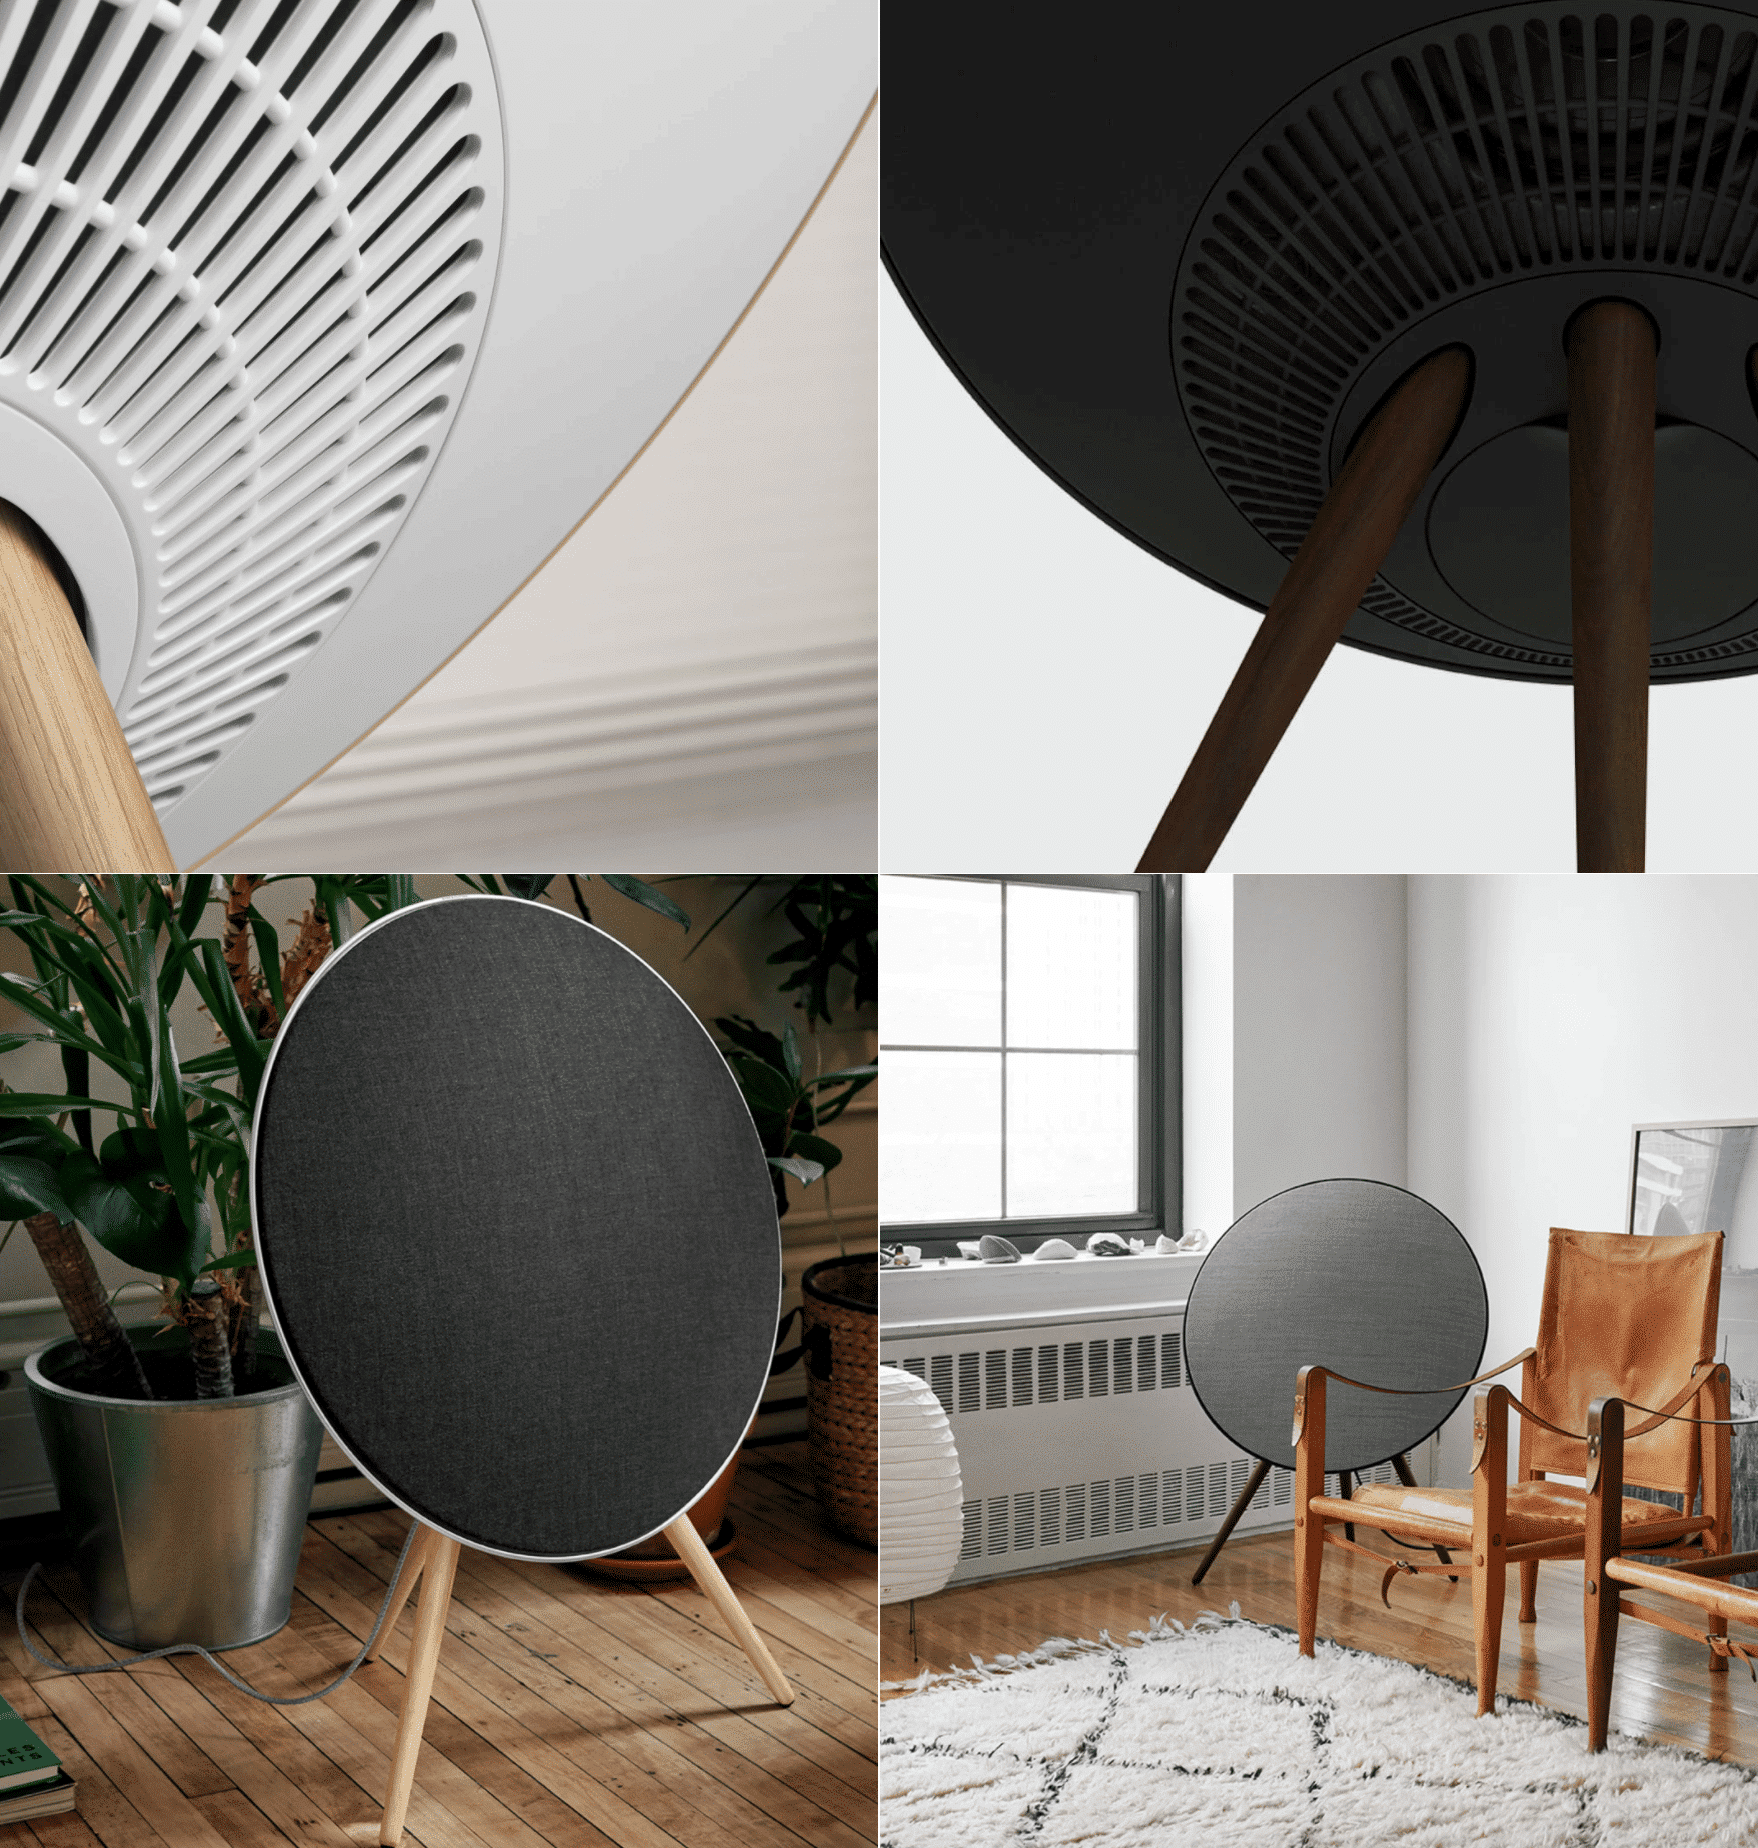 B&O Beoplay A9 Colors